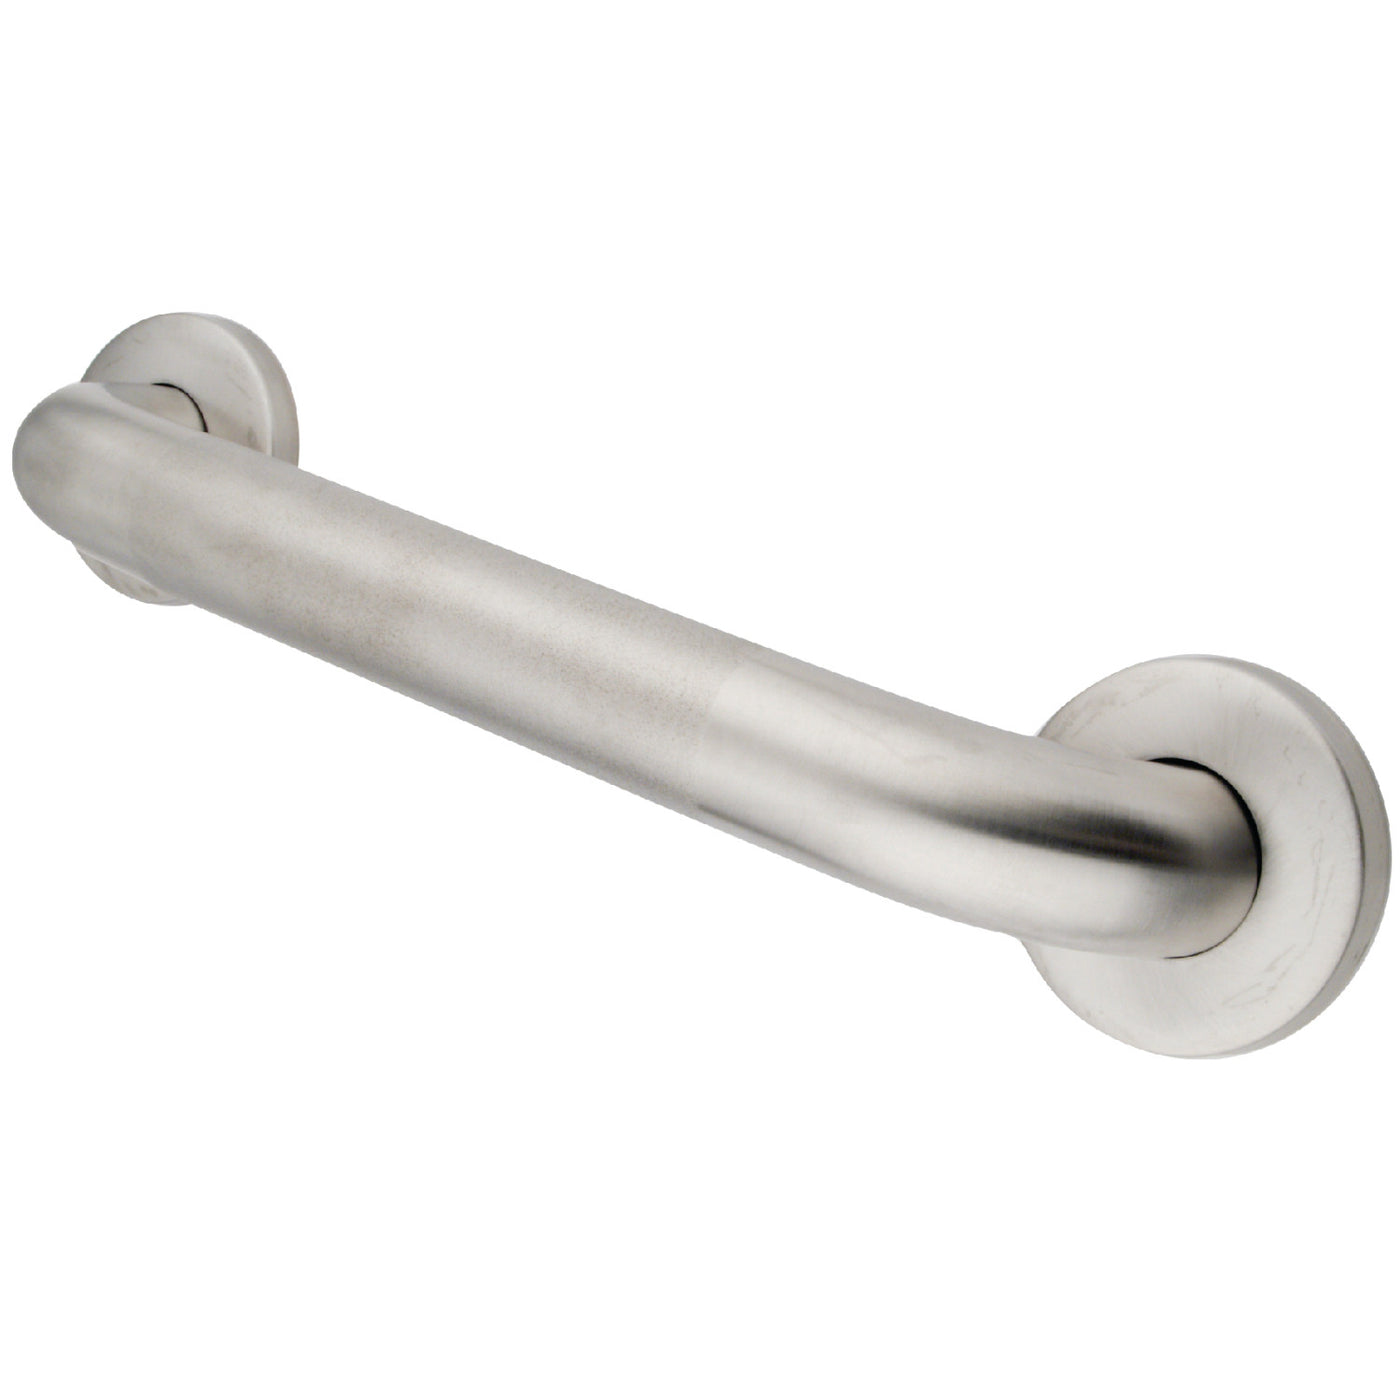 Elements of Design EGB1230CT 30-Inch Stainless Steel Grab Bar, Brushed